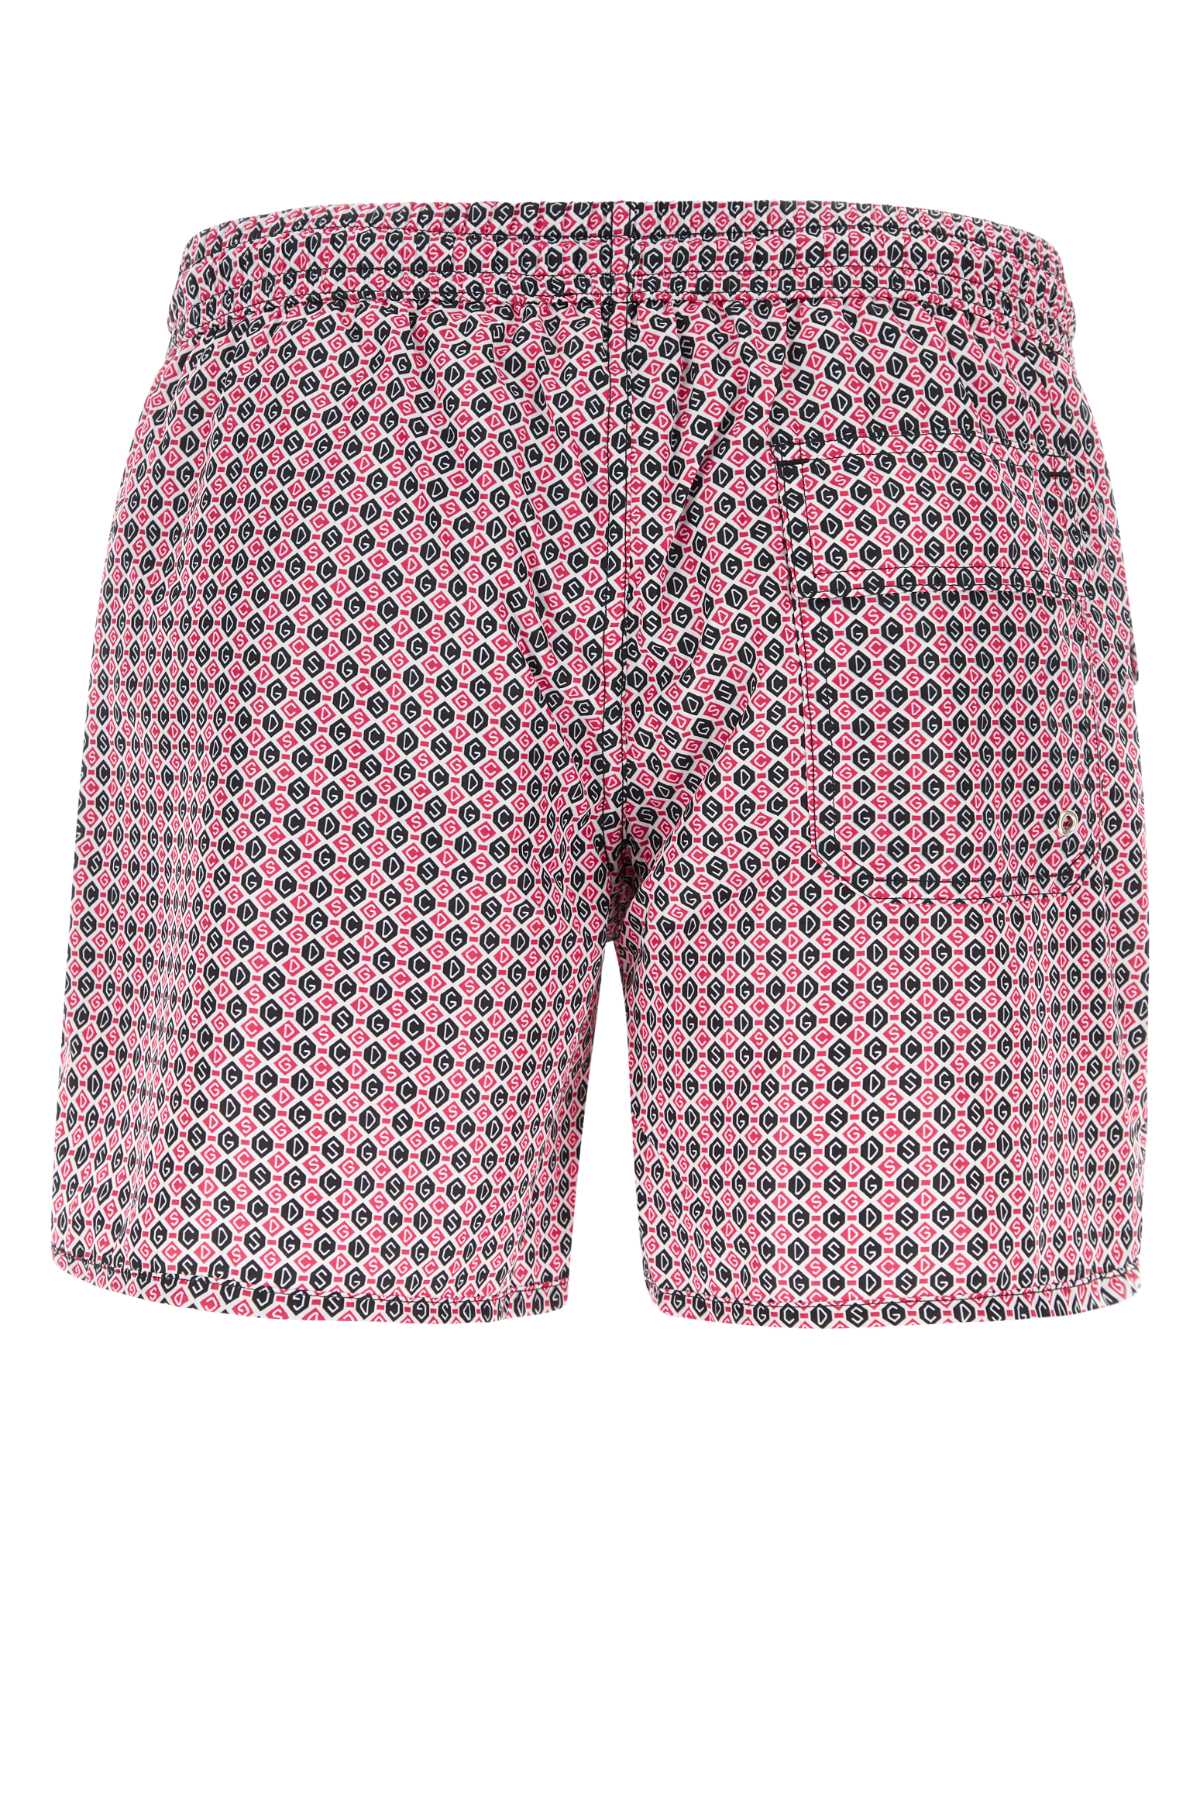 Shop Gcds Printed Polyester Swimming Shorts In Mx